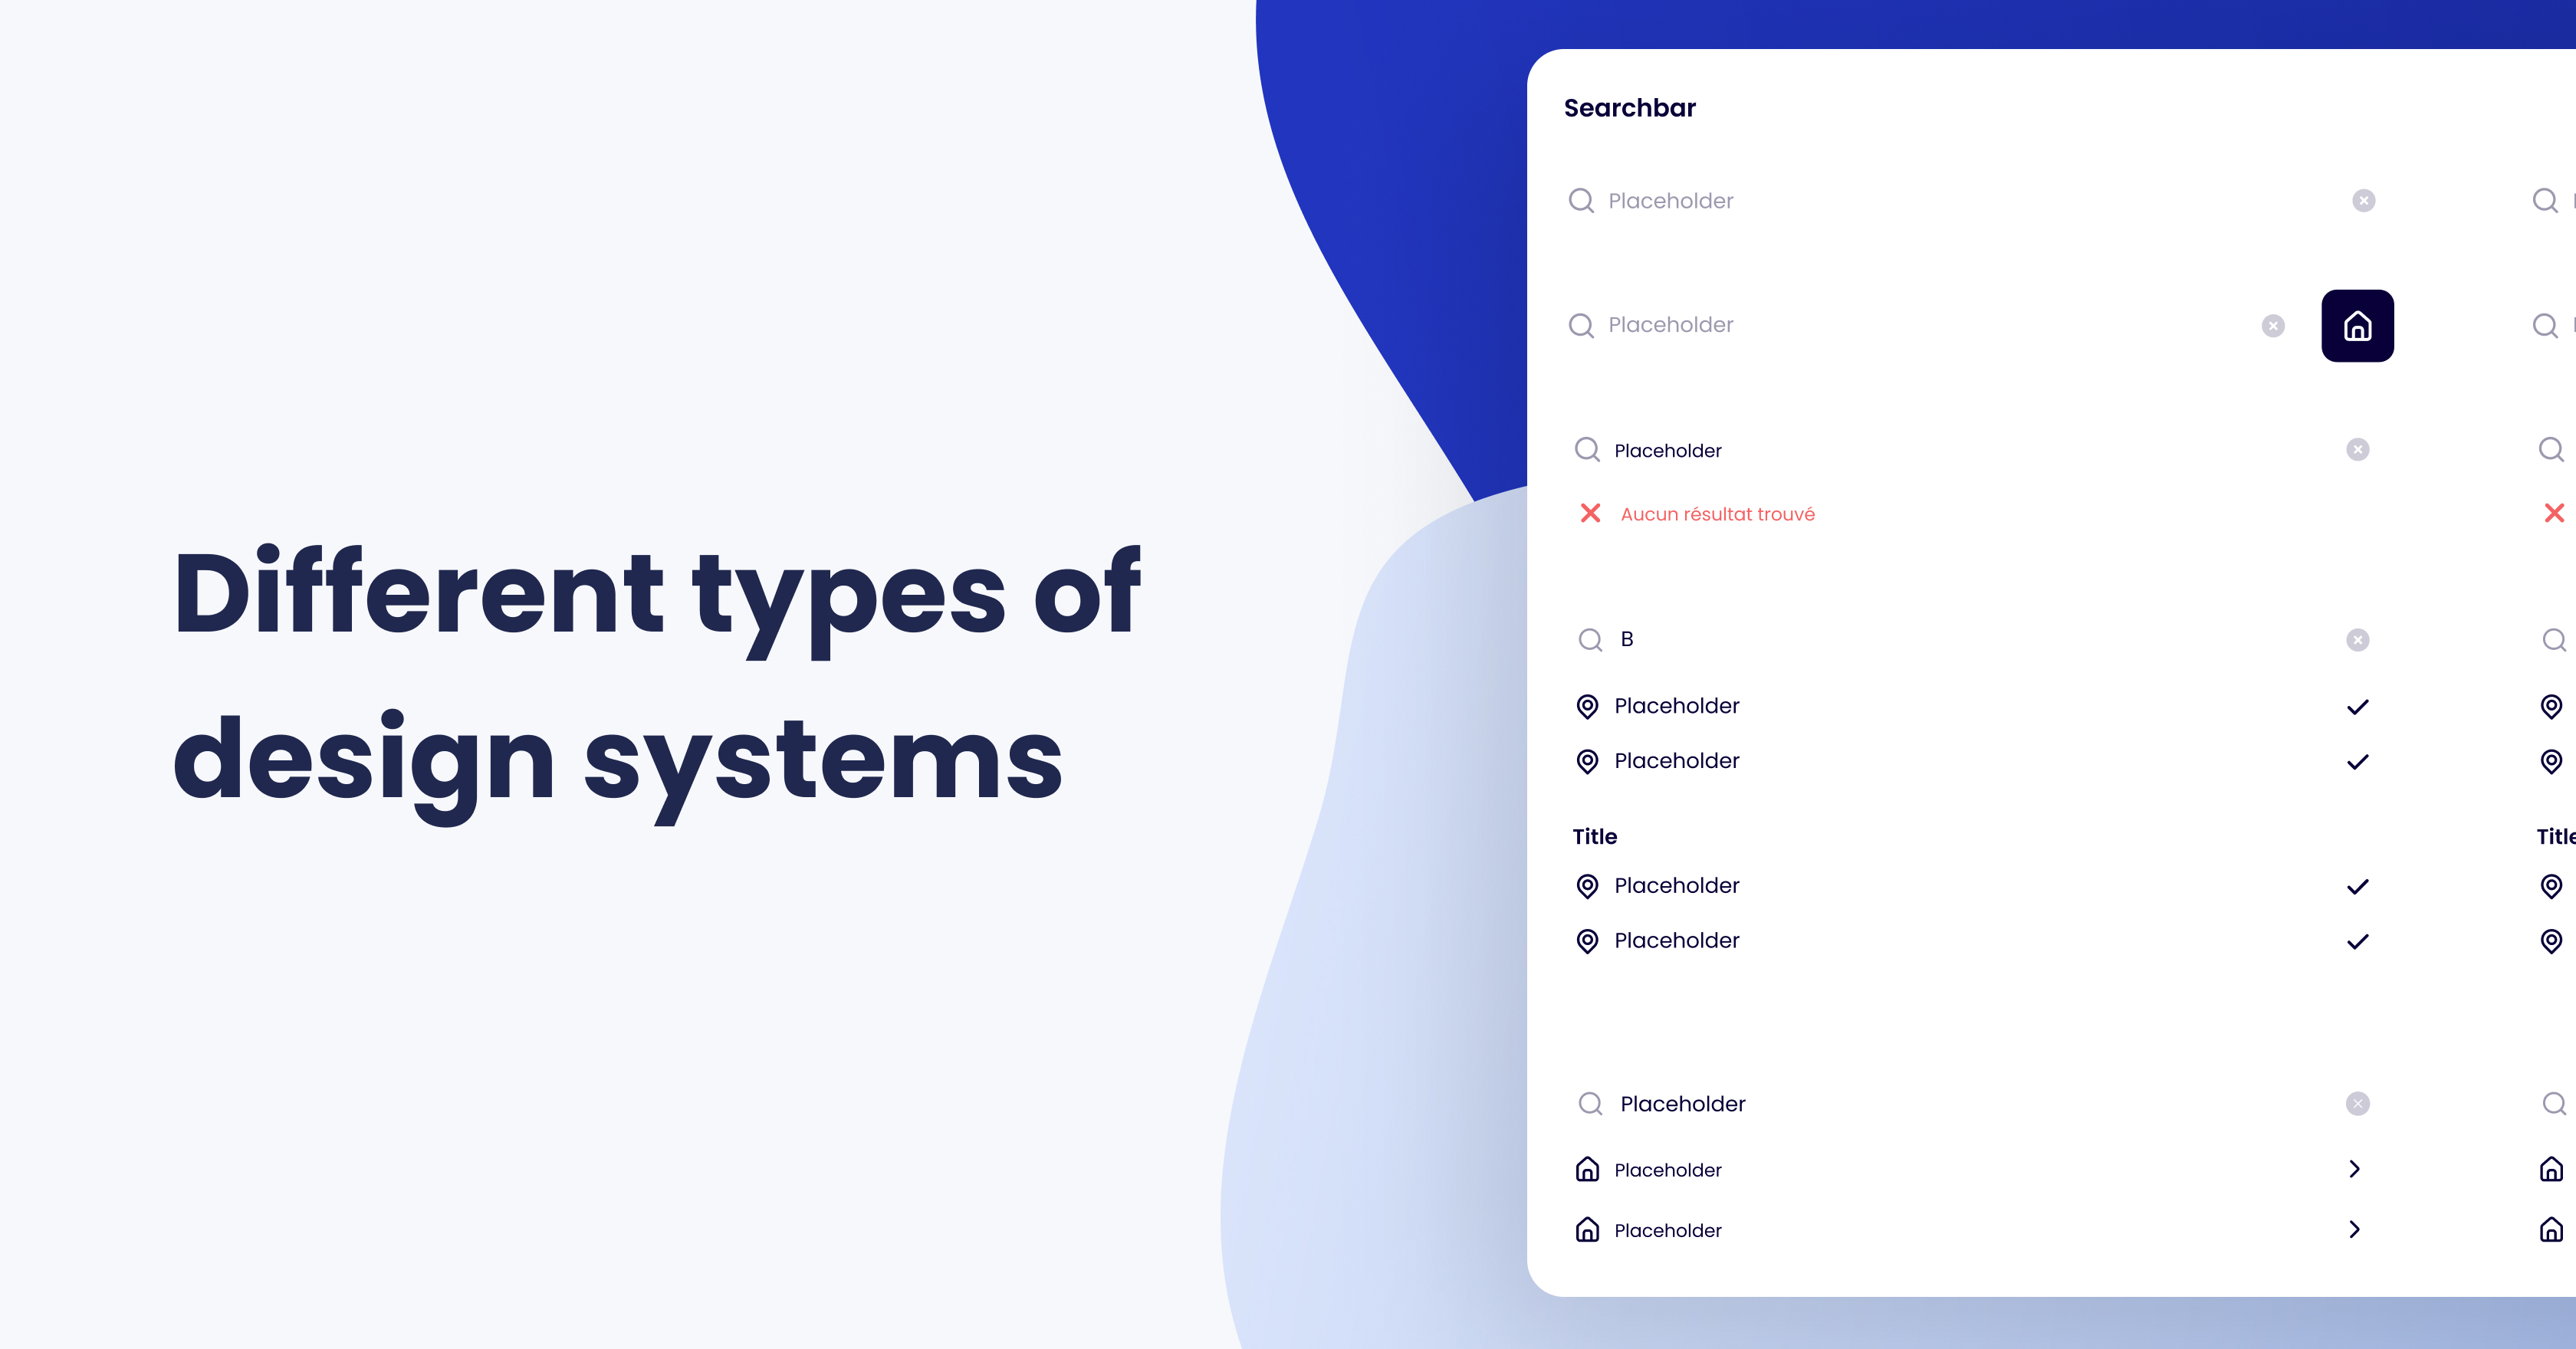 Nightborn - Different types of design systems